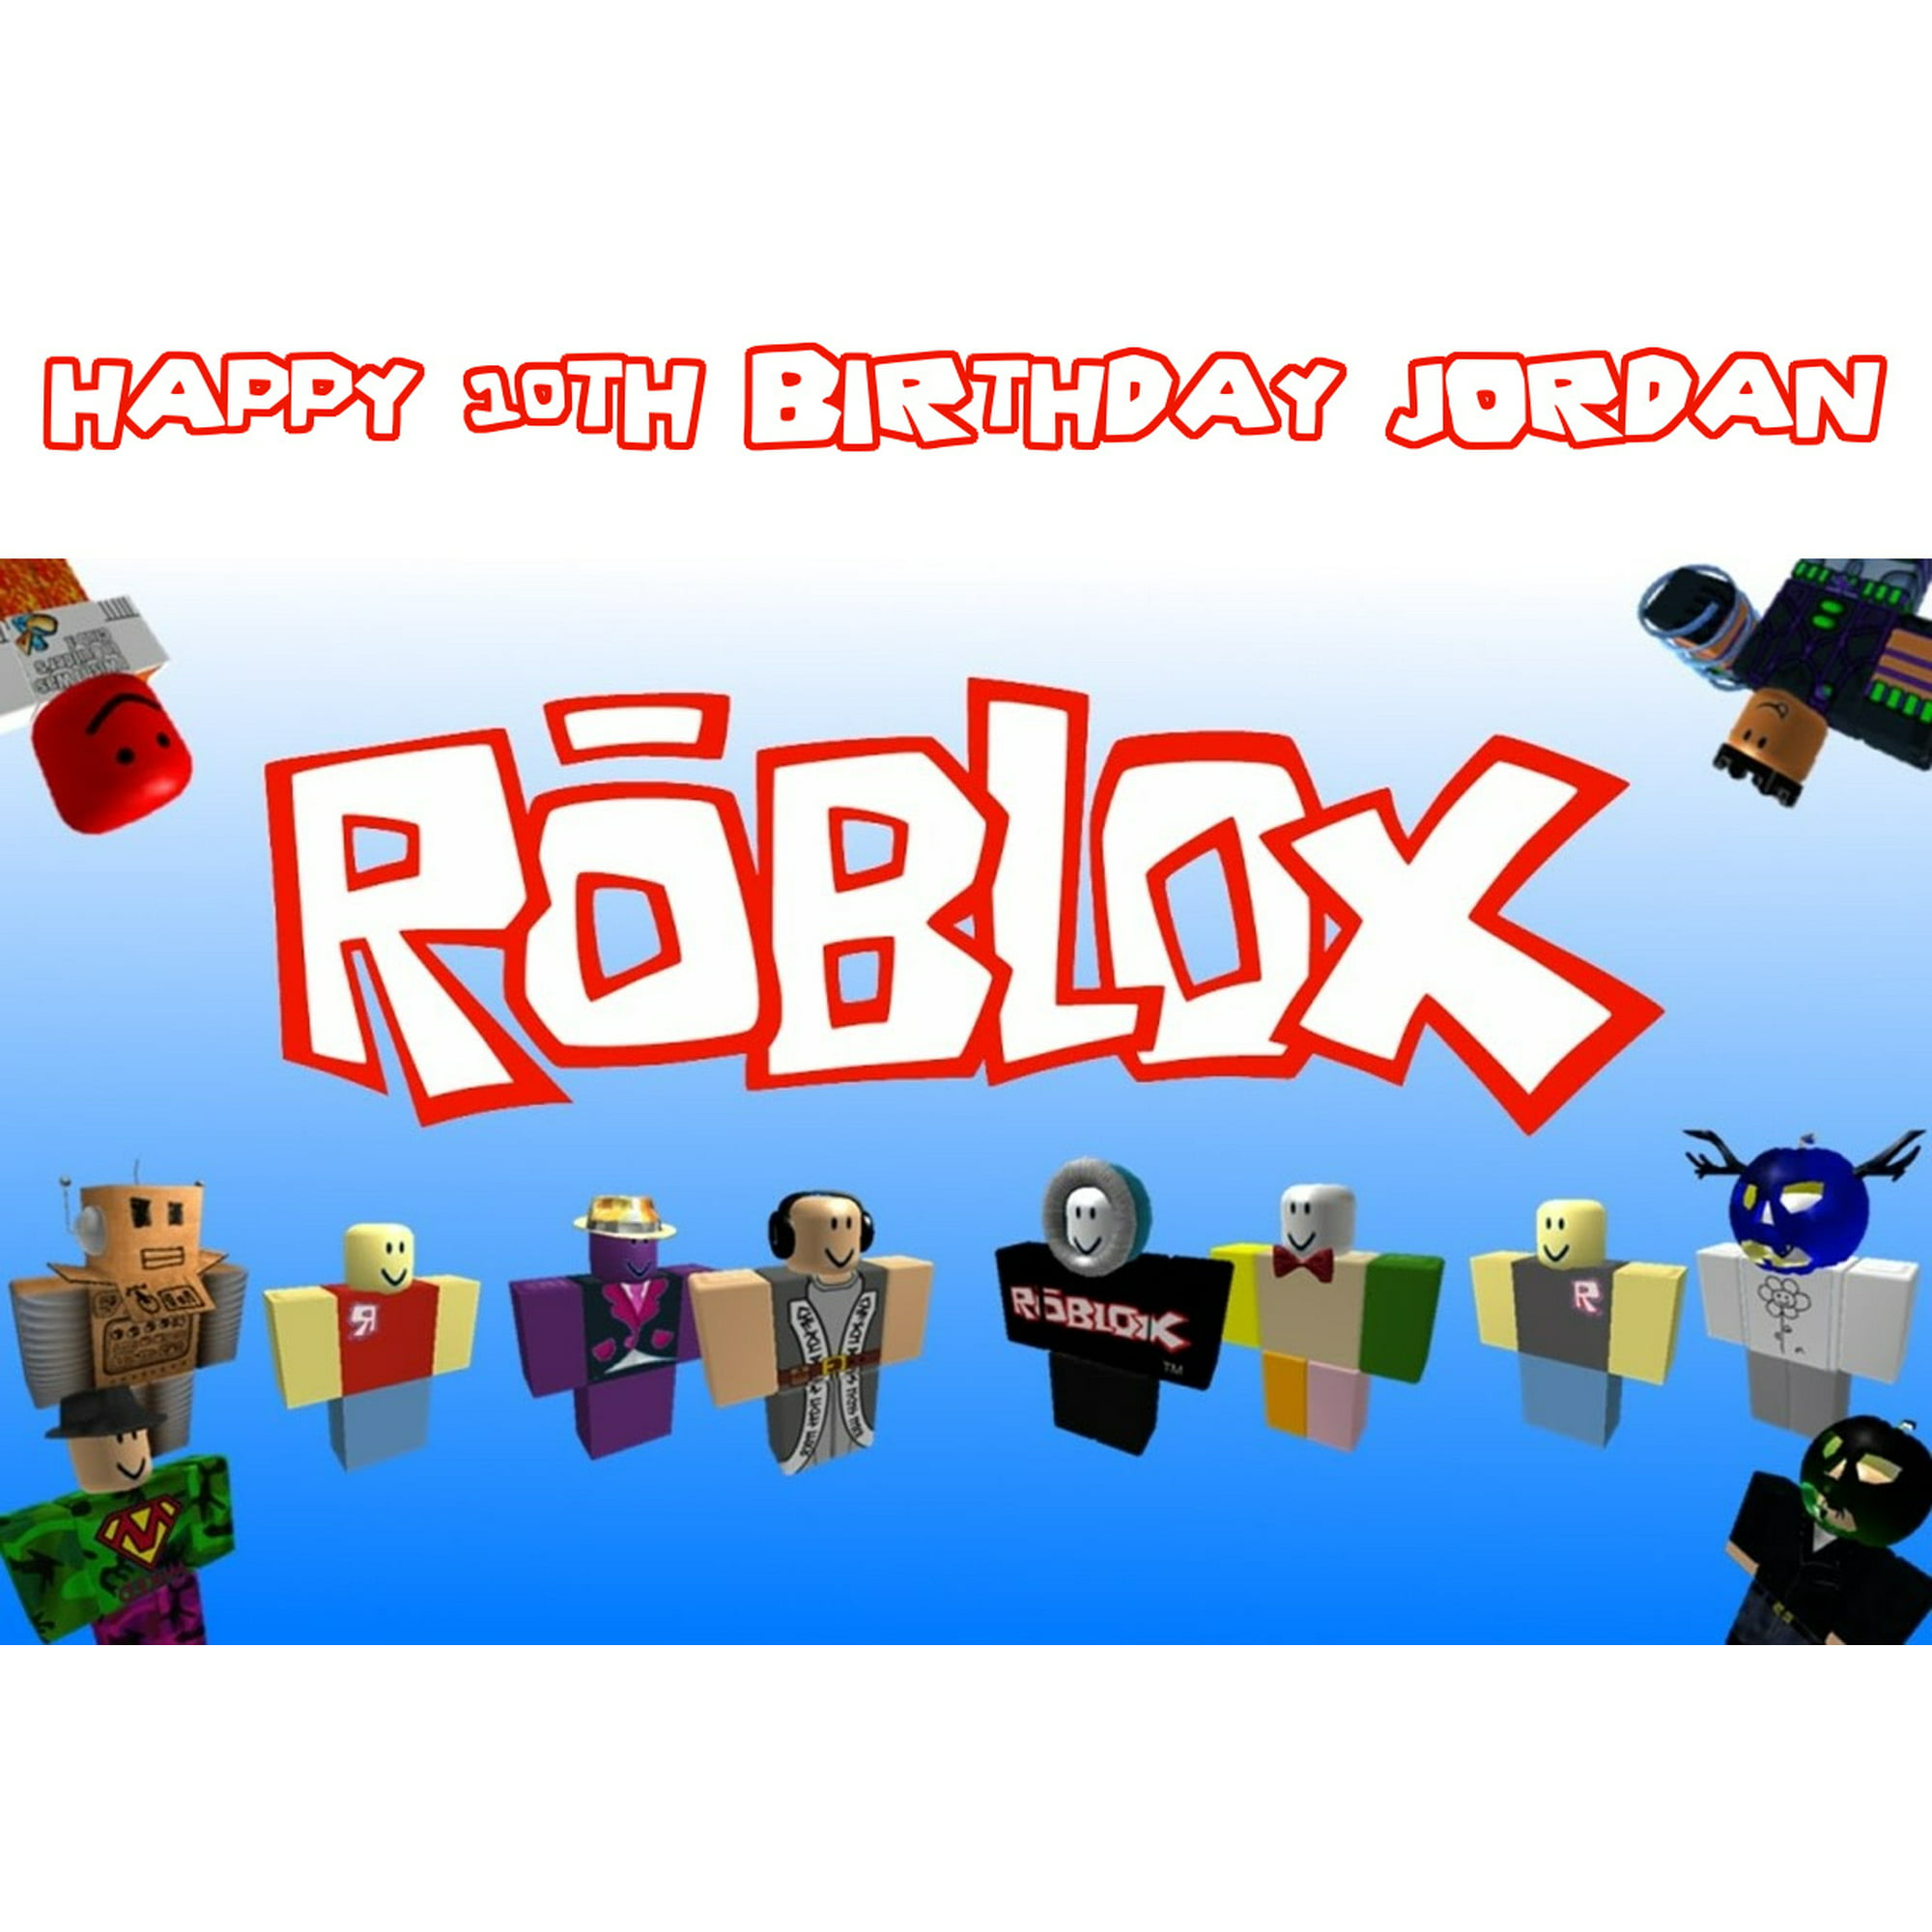 roblox edible premium wafer birthday party cake decoration image topper